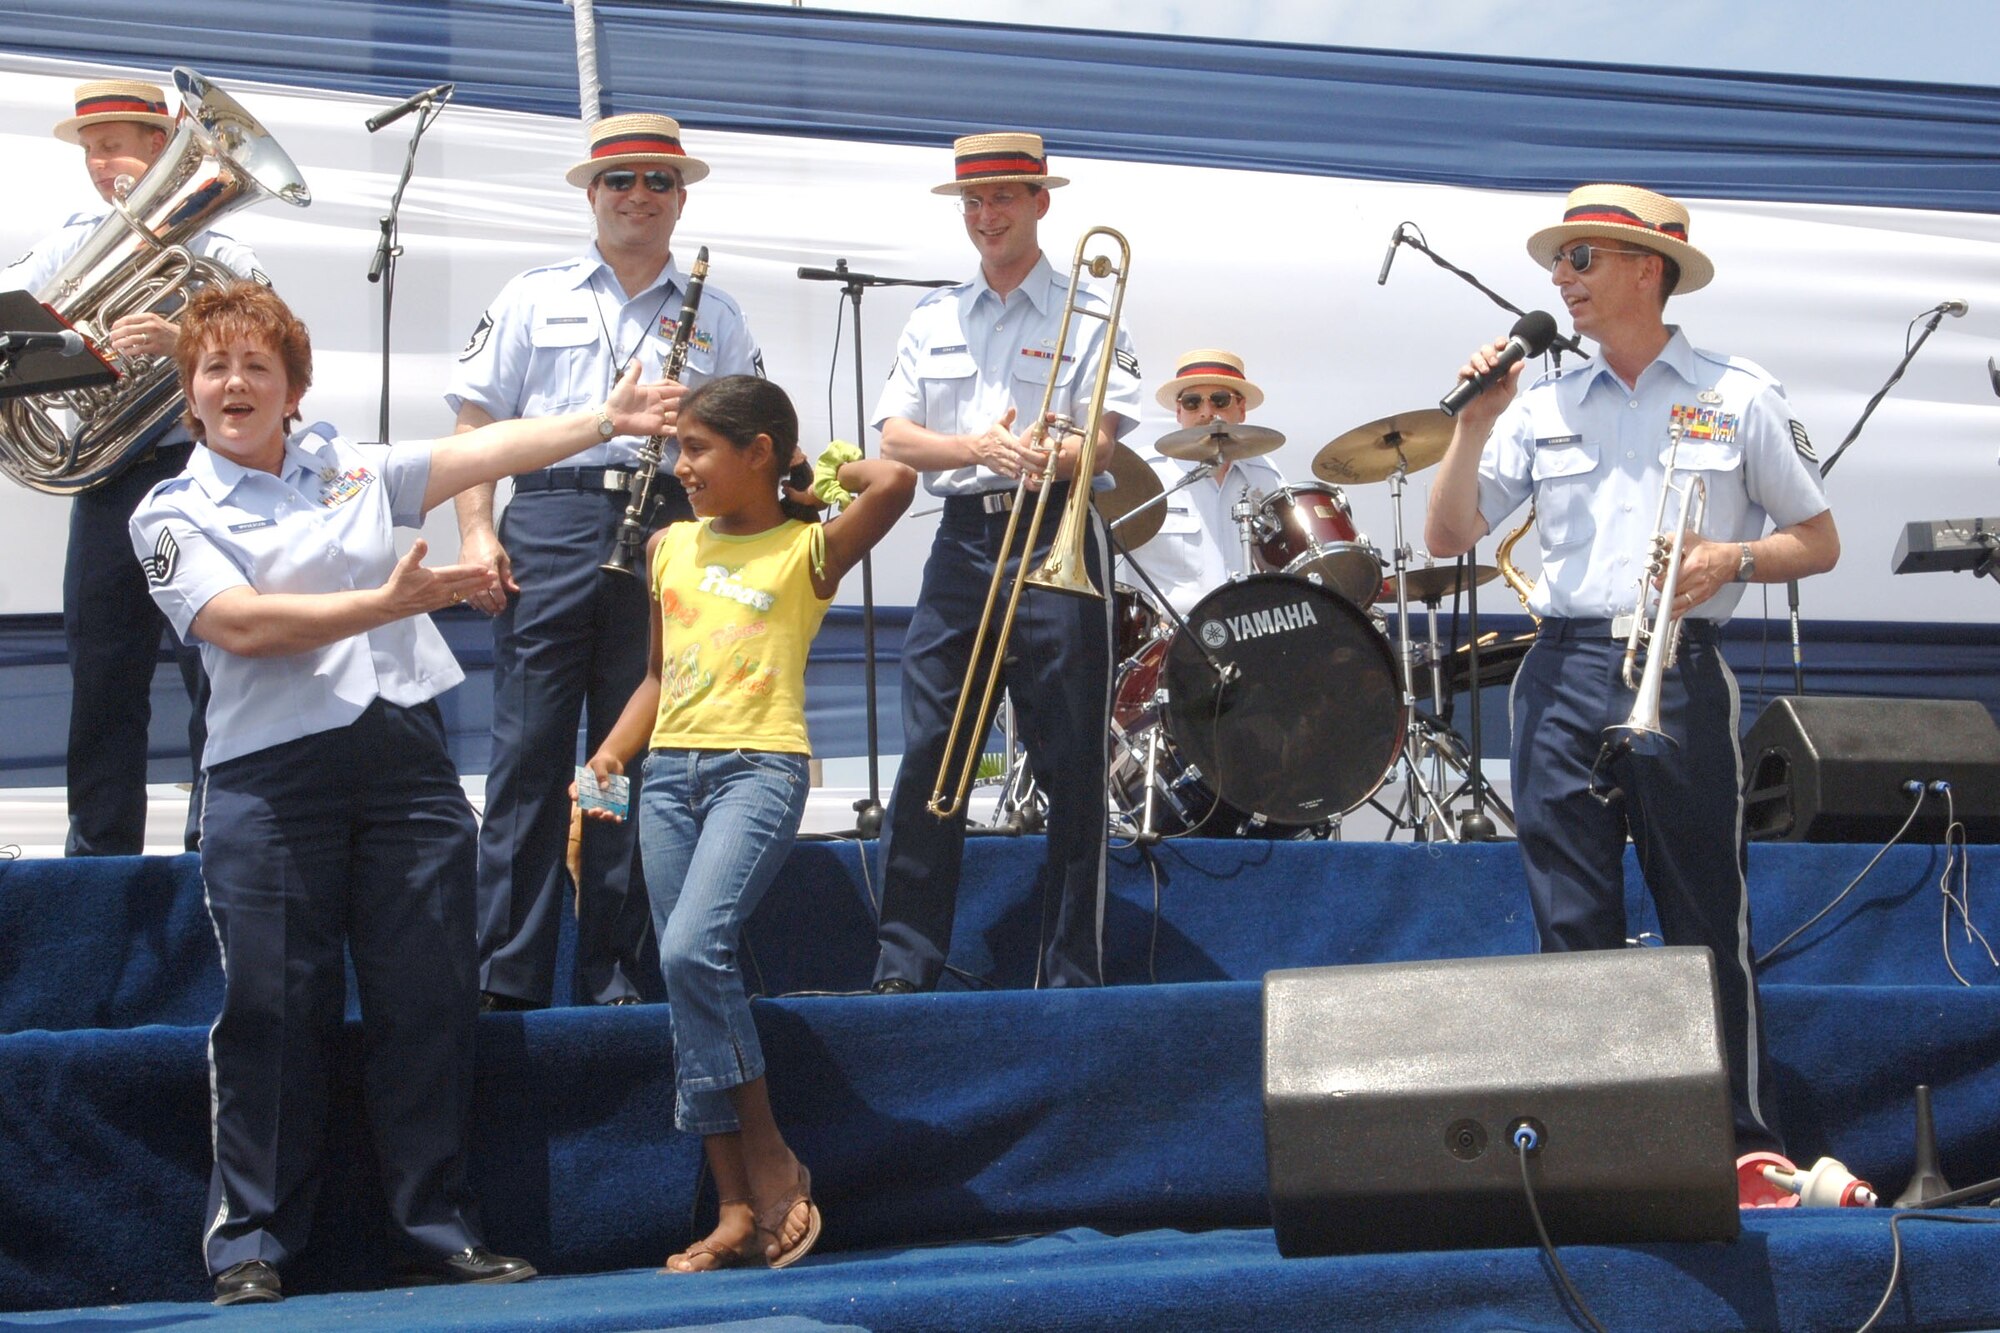 The Air National Guard Band of the Southwest performs before a crowd of more than 15, 000 Peruvians during Falcon Condor 2007, a joint air show at Las Palmas Air Force Base, Peru. The air show directly supports the U.S. Southern Command's engagement goals and furthers relations between allied nations. (U.S. Air Force photo/Tech. Sgt. Kerry Jackson)